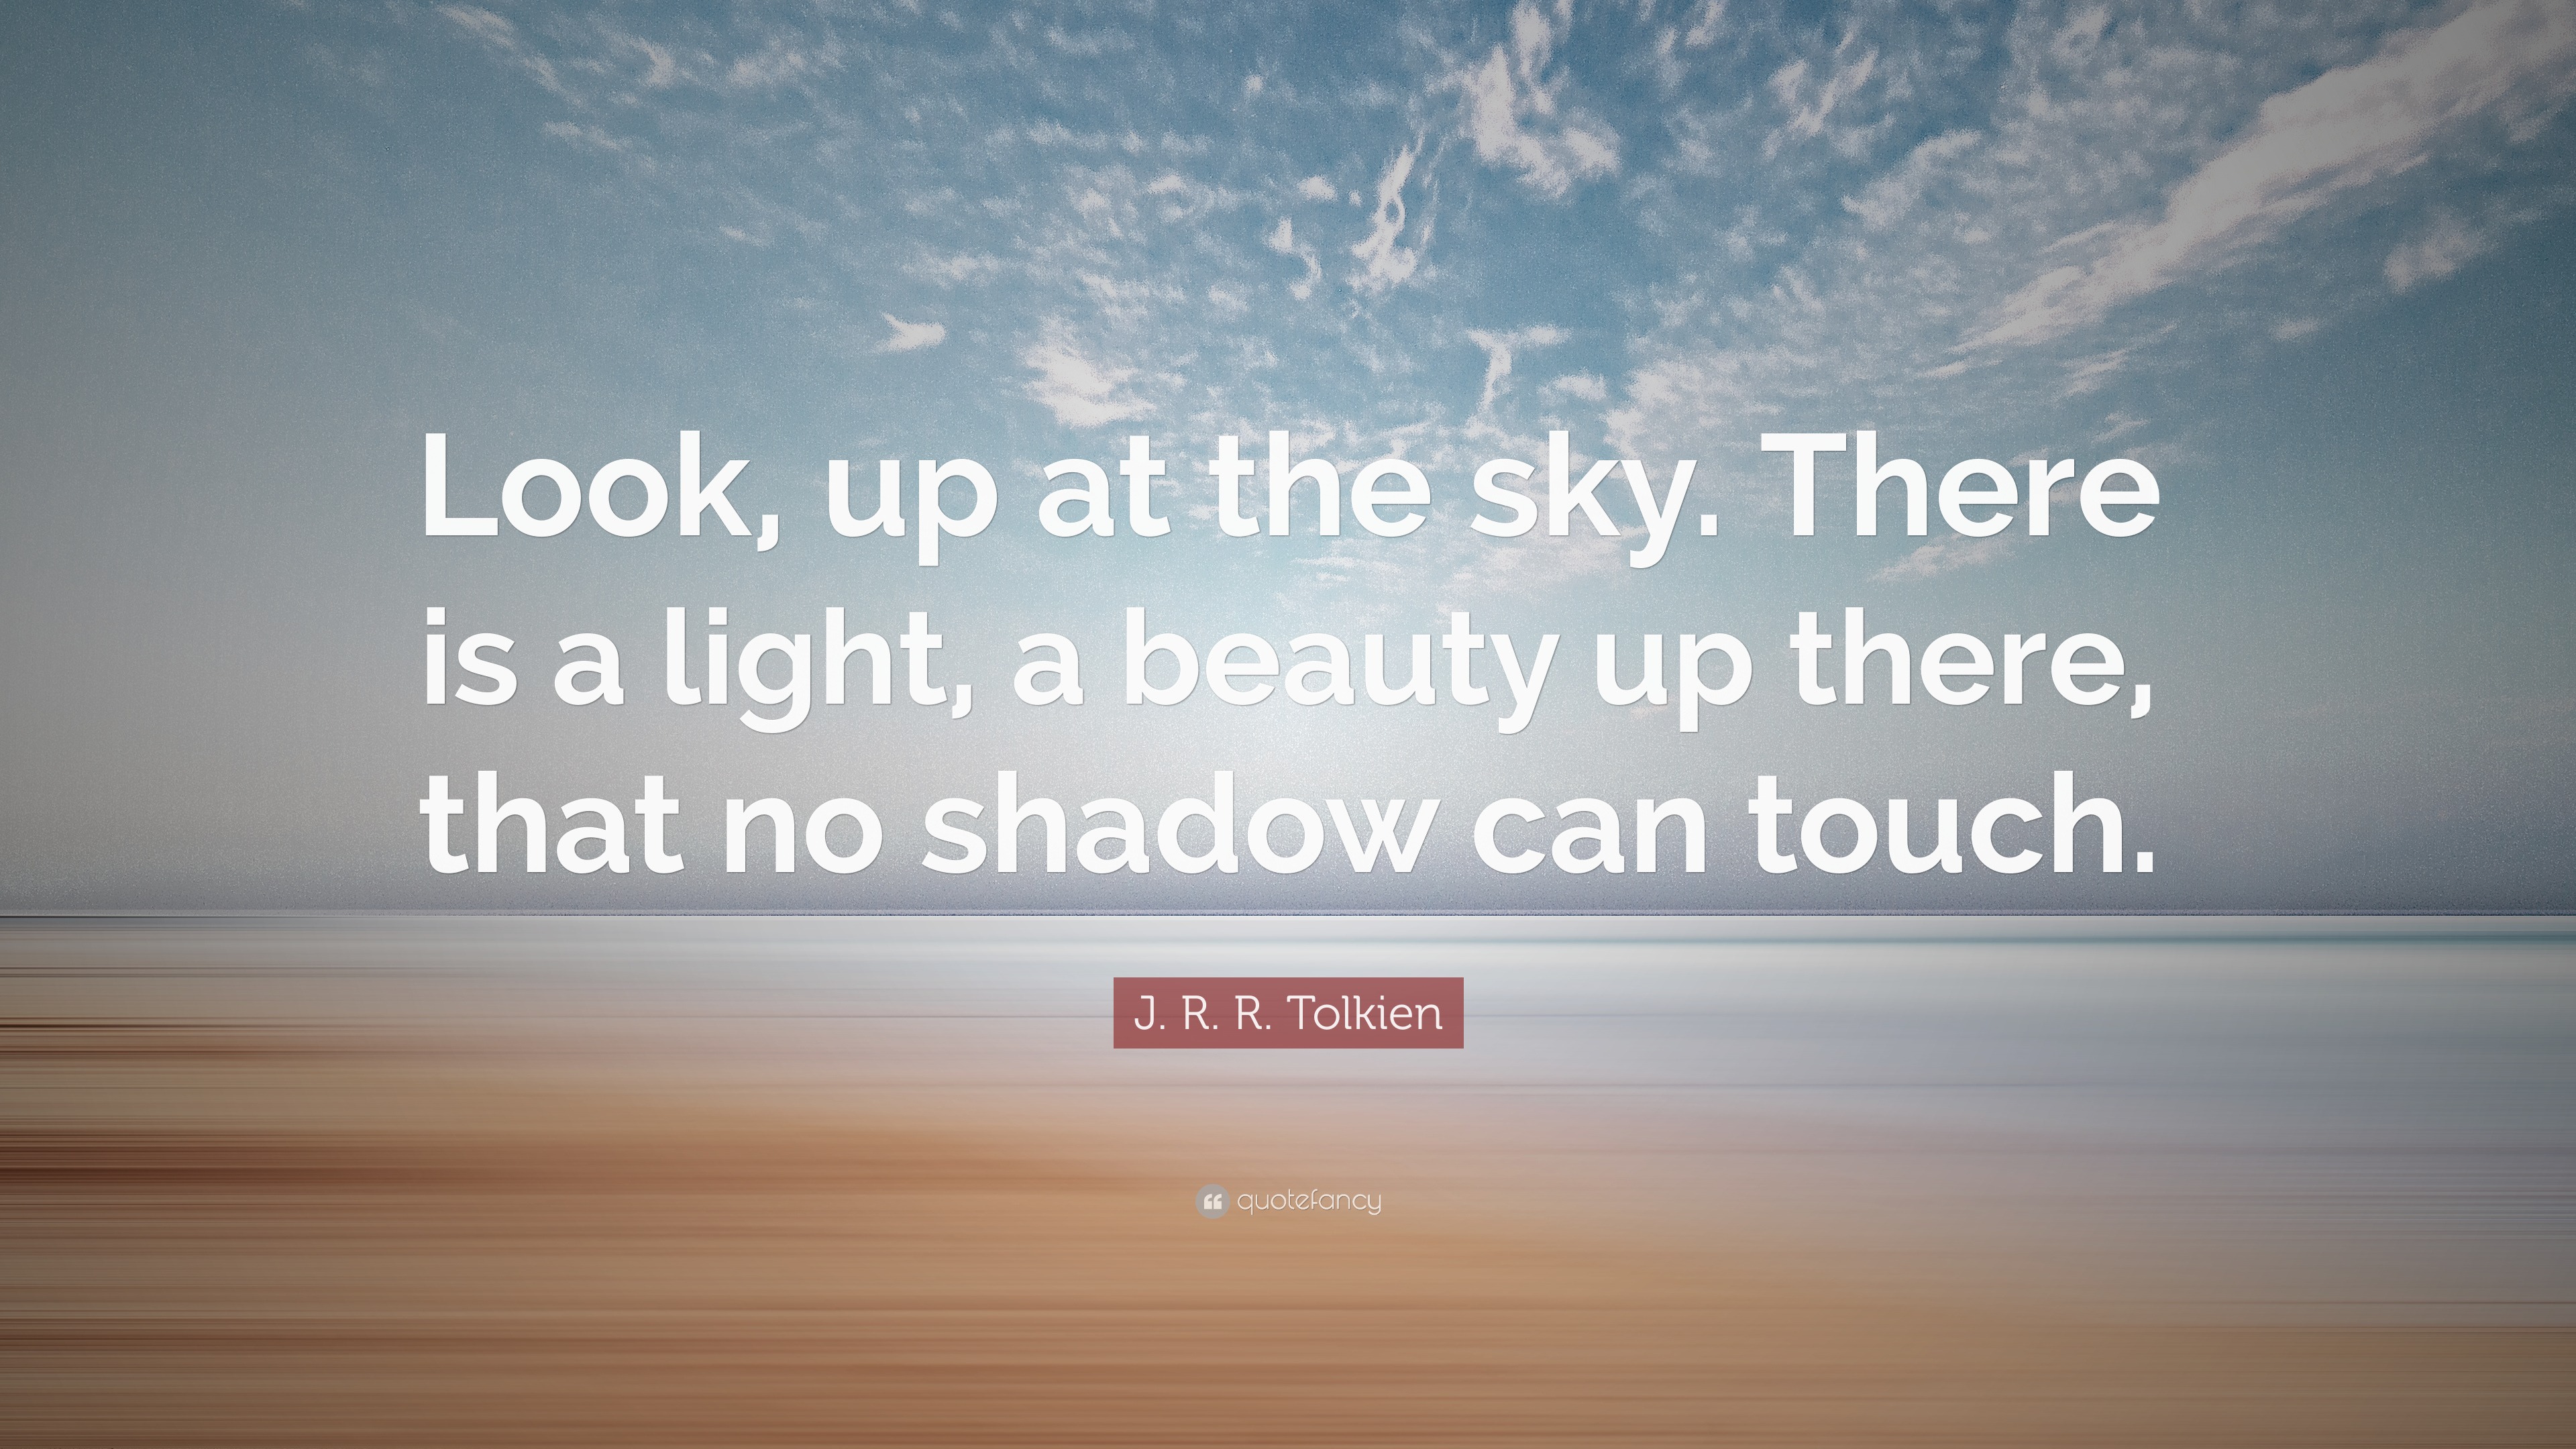 J R R Tolkien Quote Look Up At The Sky There Is A Light A Beauty Up There